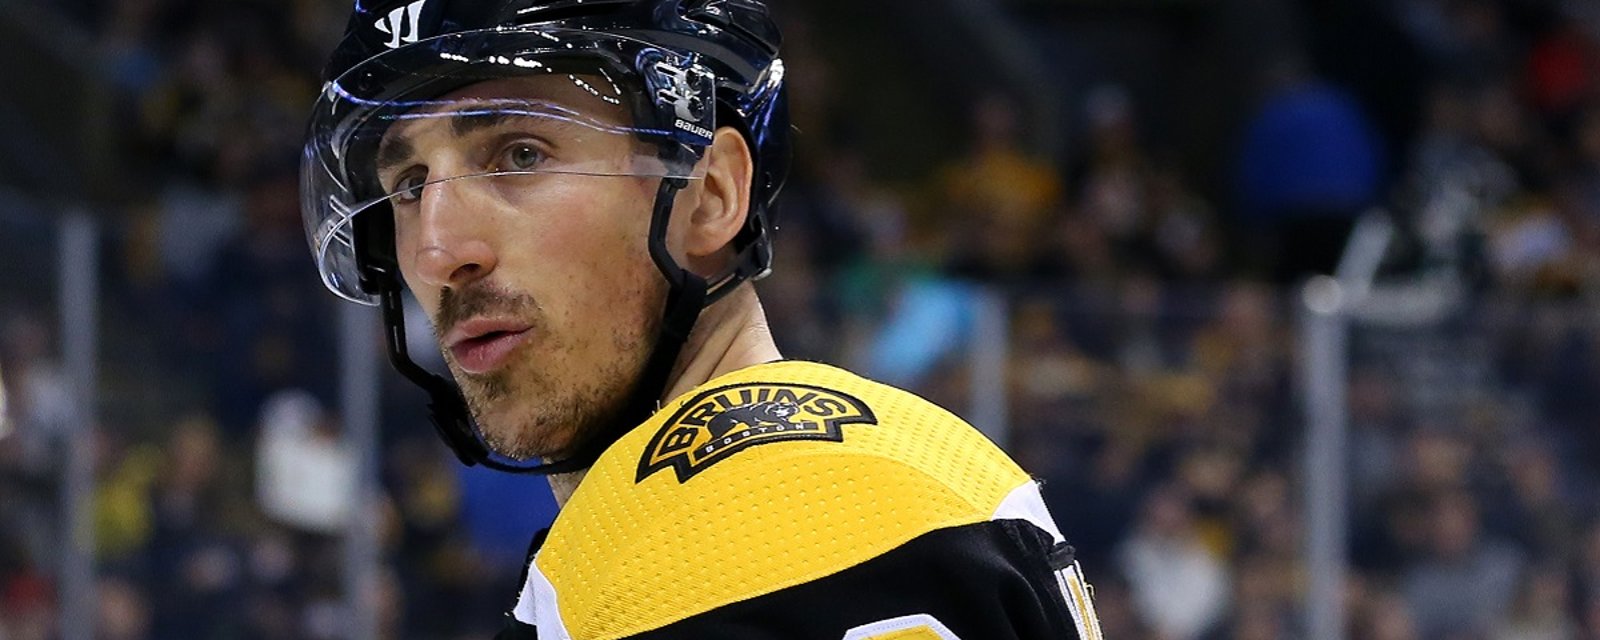 Brad Marchand fires back at critics of his partying.